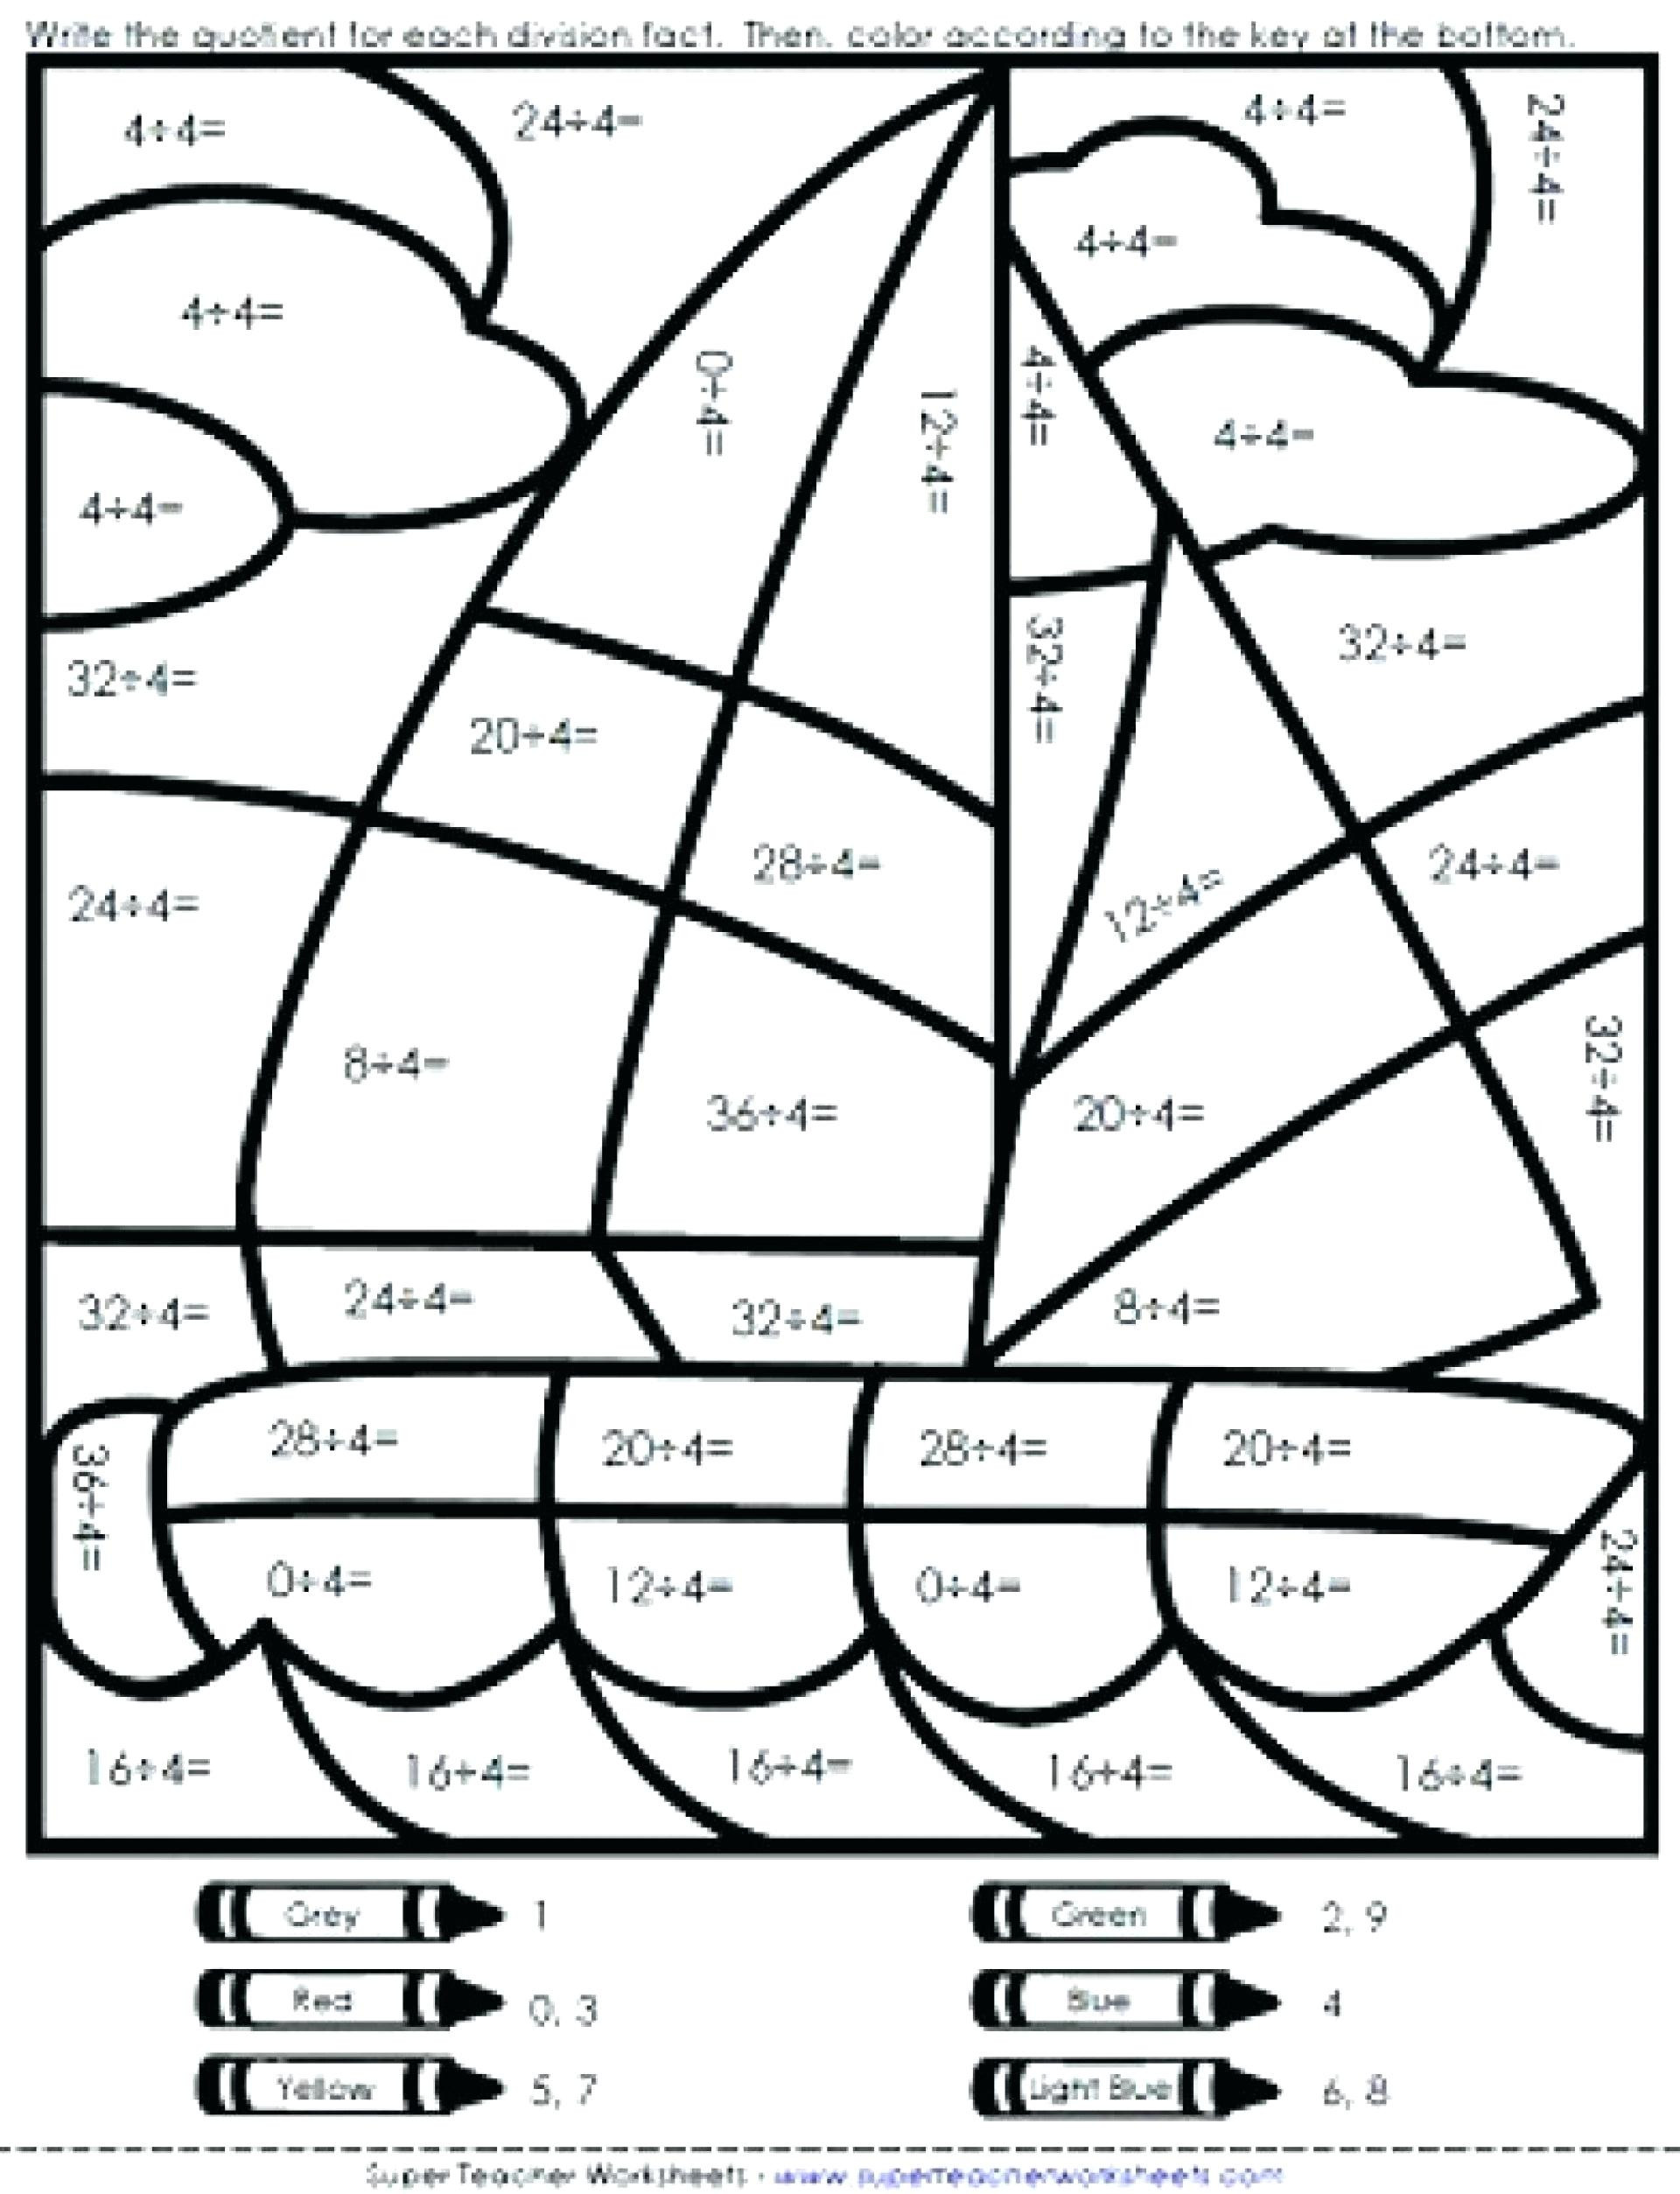 Free Math Worksheets Second Grade 2 Place Value Rounding Round 3 Digit Numbers Nearest 100